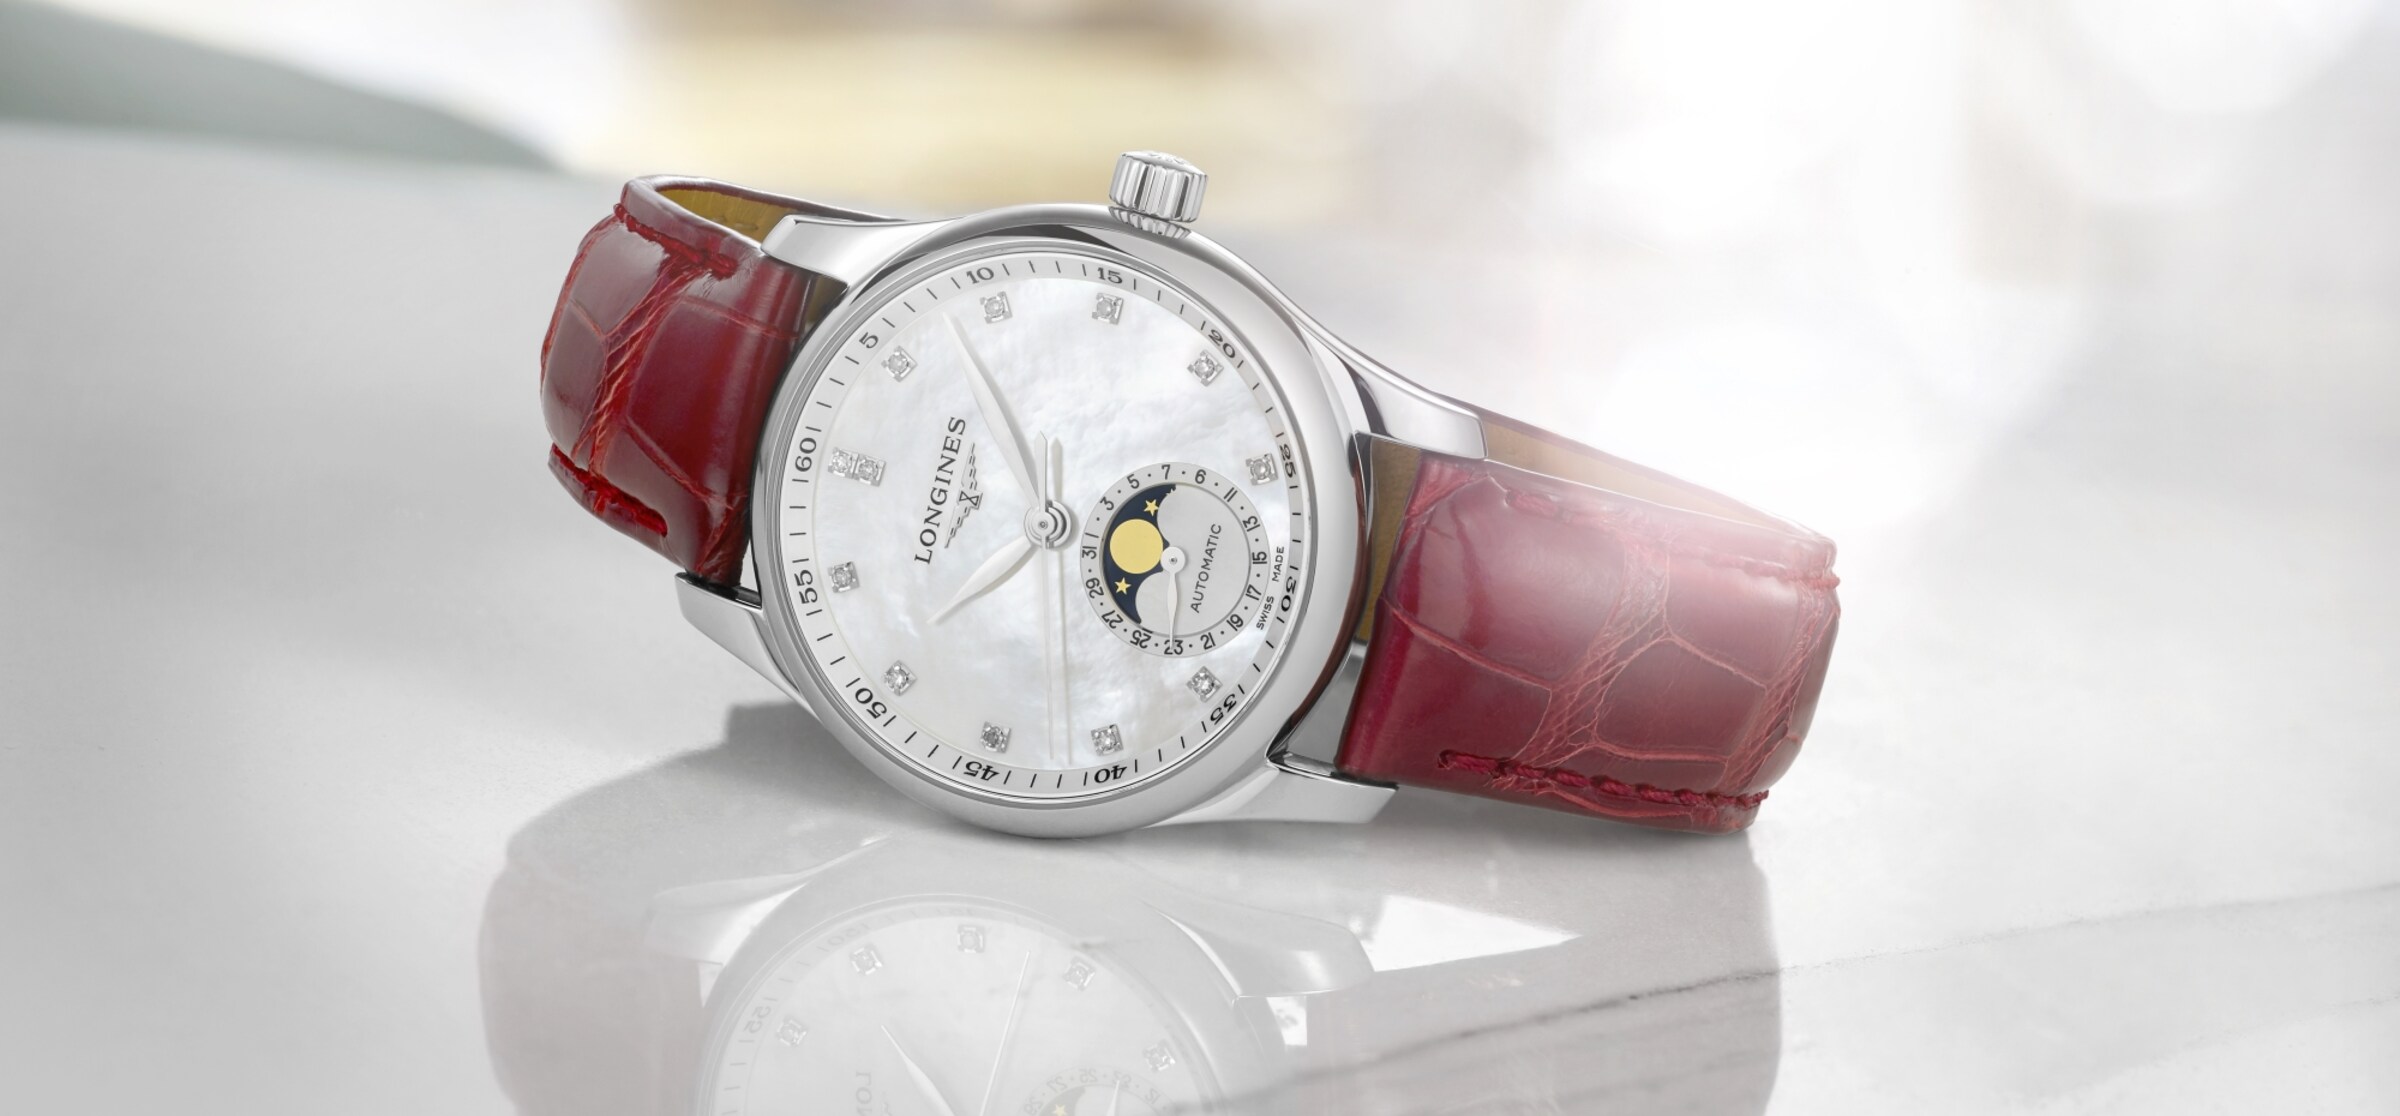 A Longines master collection watch